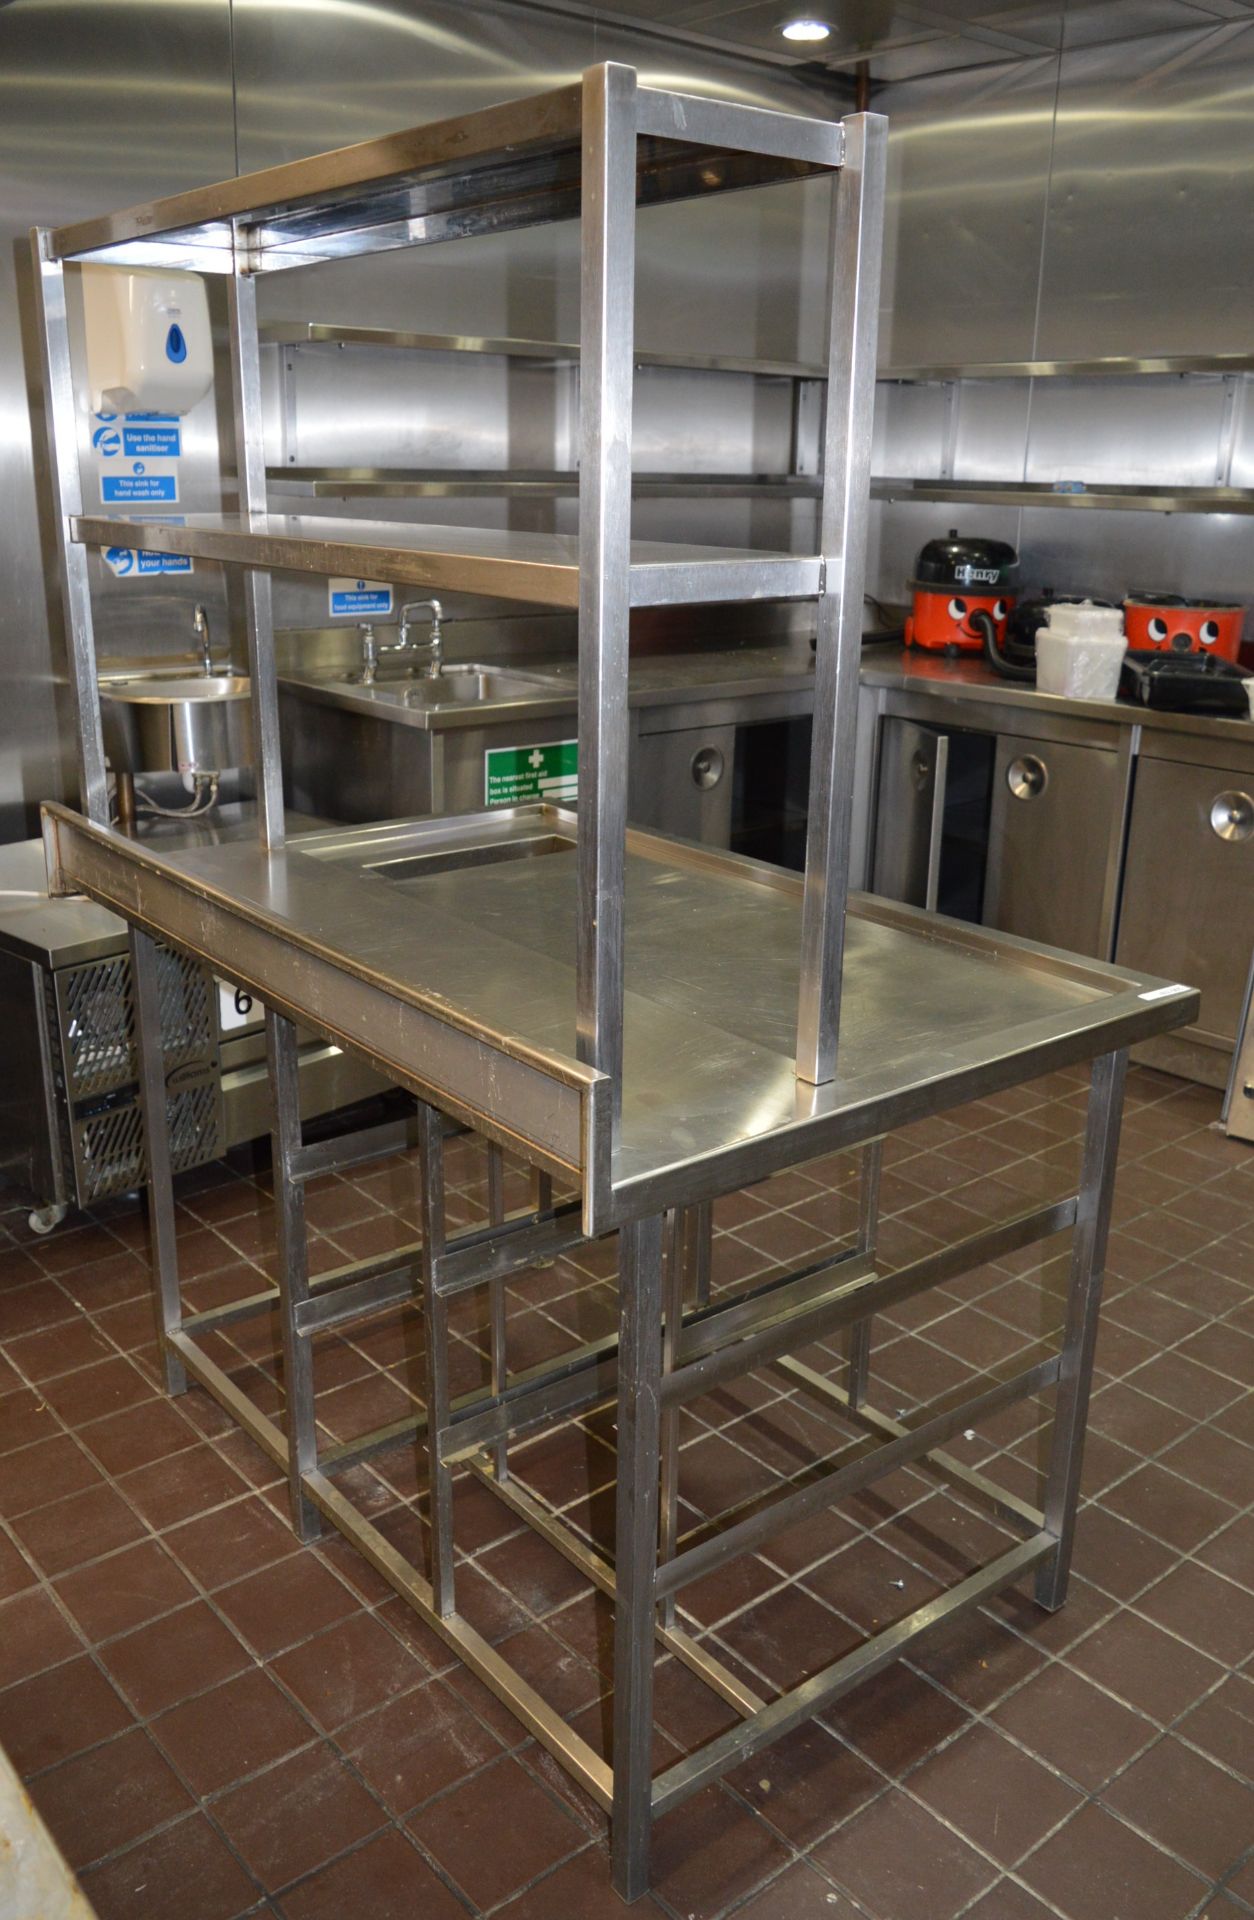 1 x Stainless Steel Prep Bench With Undercounter Shelves, Bin Chute and Overhead Shelves - H87/171 x - Image 5 of 5